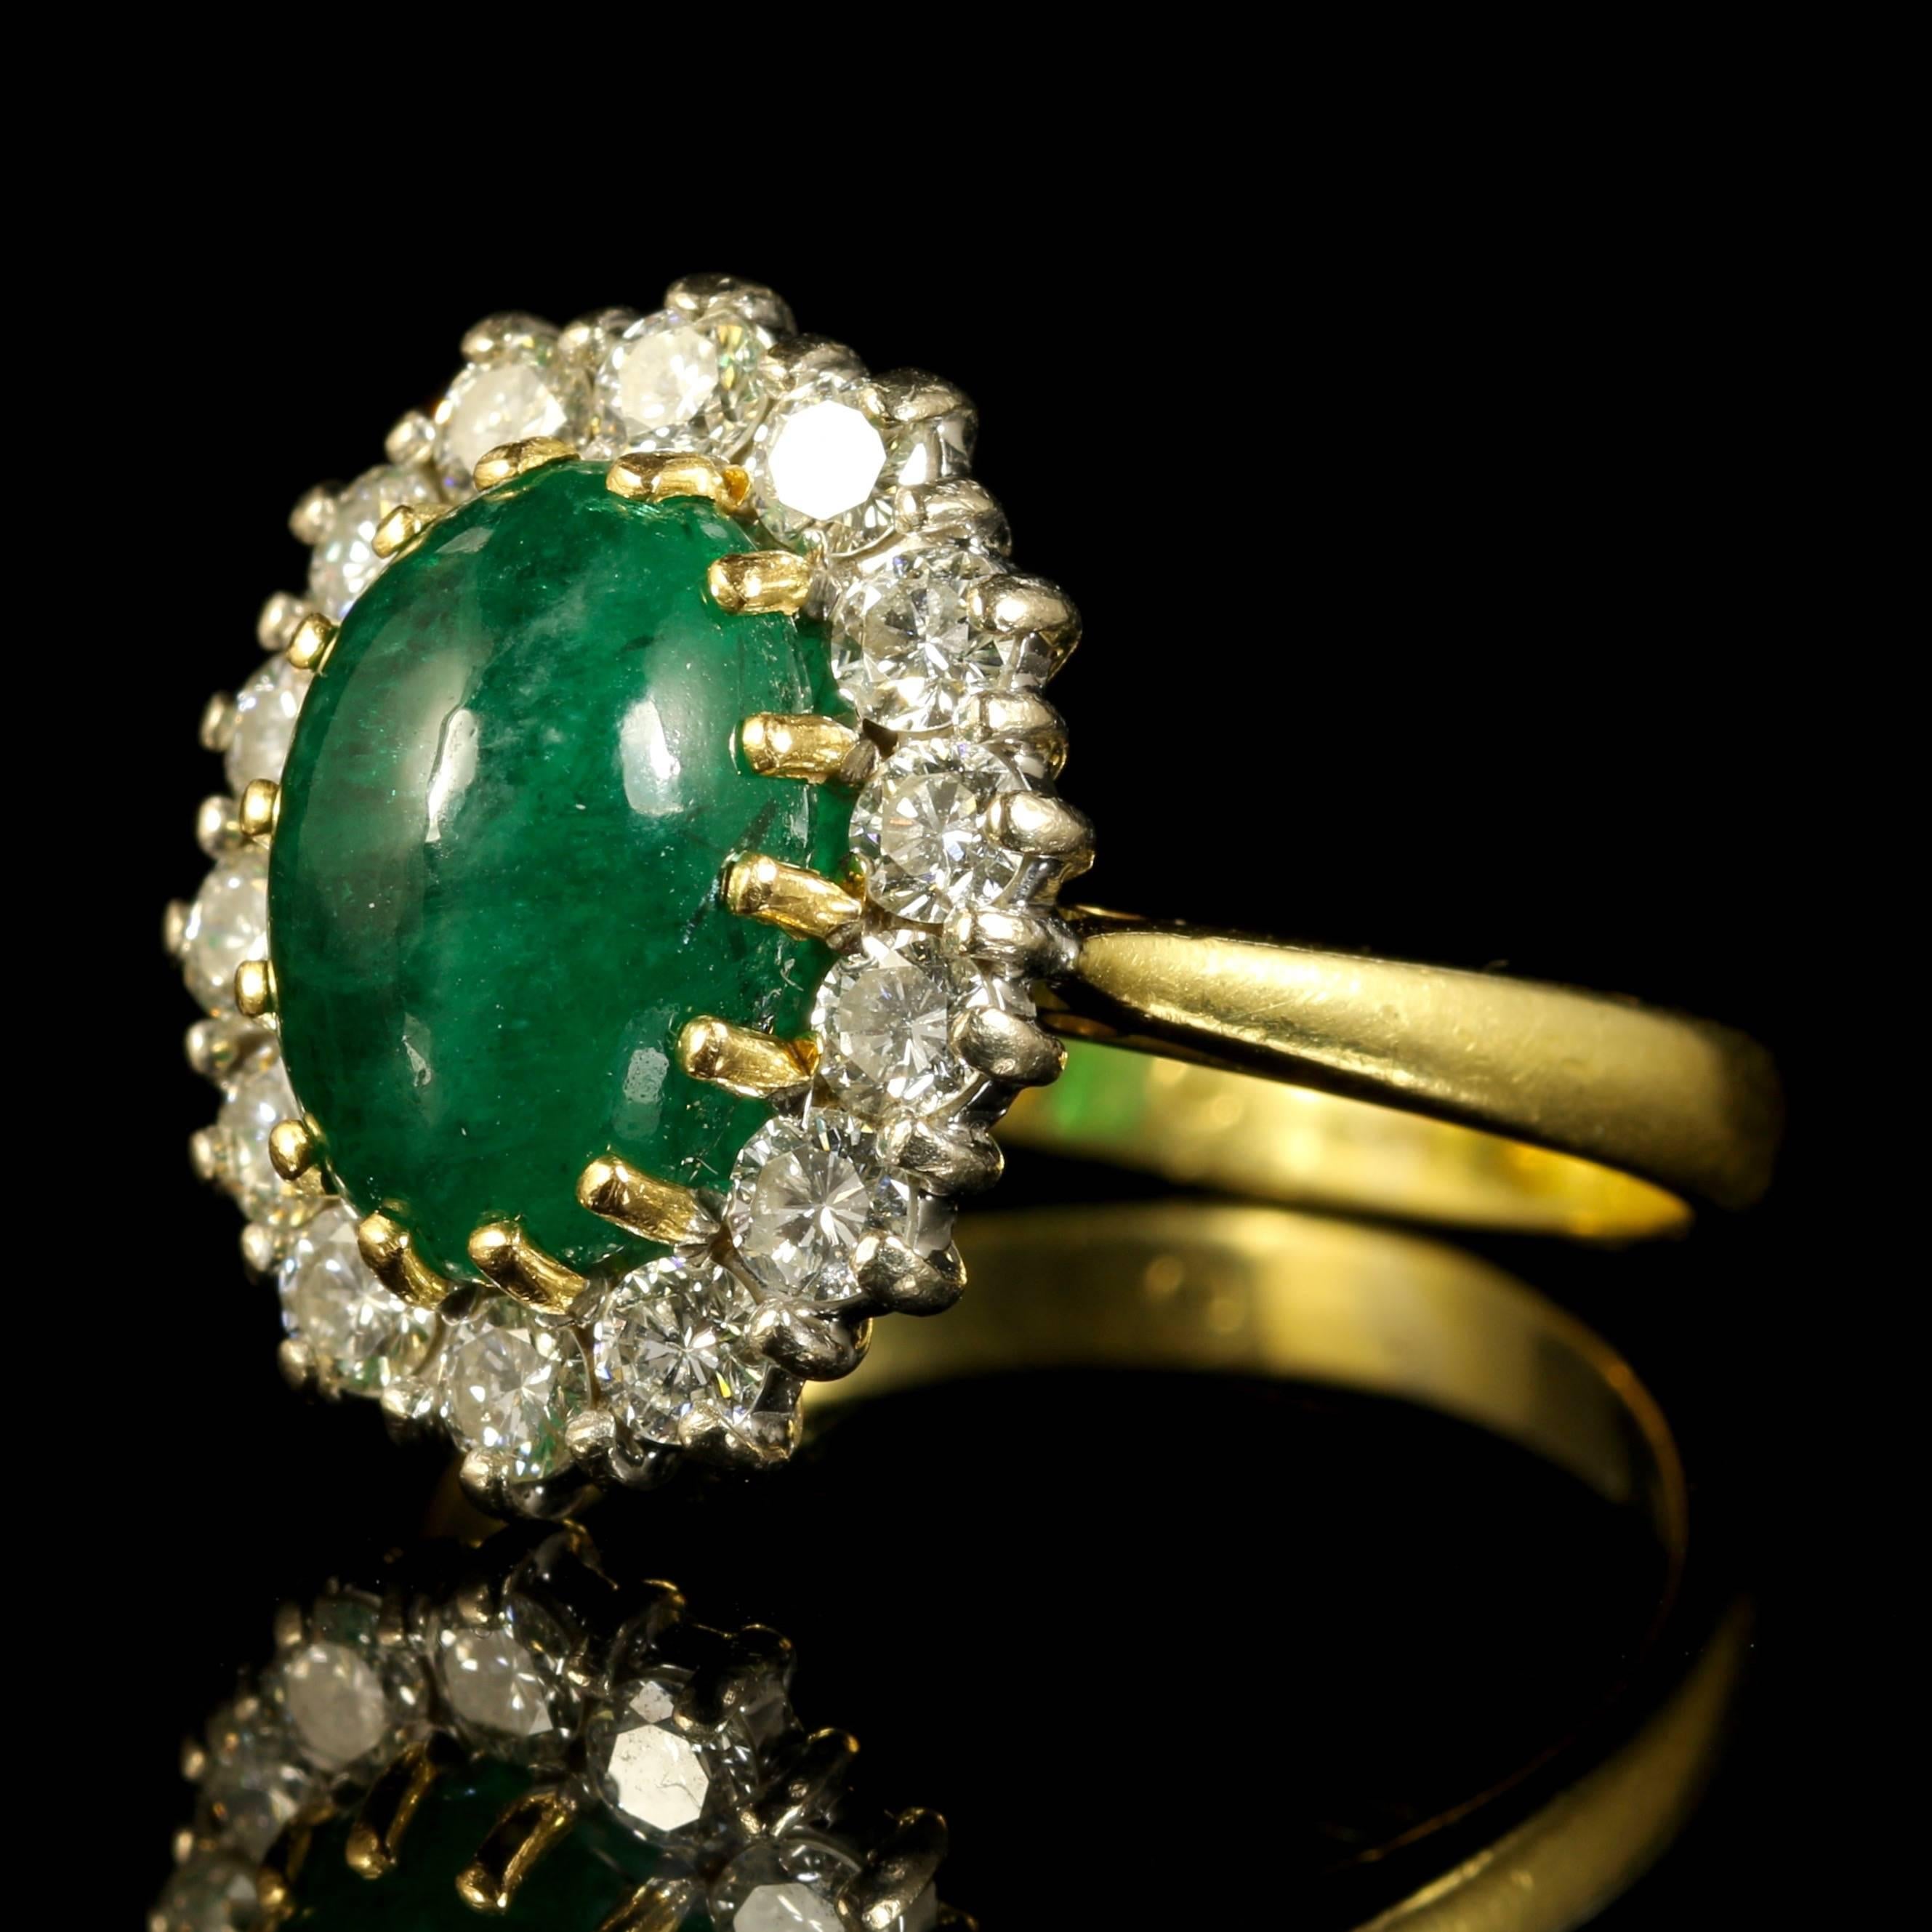 This fabulous Antique Victorian ring is Circa 1900.

The lovely cabochon Emerald has a lovely rich green hue surrounded by old cut Diamonds.

Its quite unusual to find a cabochon Emerald usually they are faceted.

The Emerald is approx. 3ct in